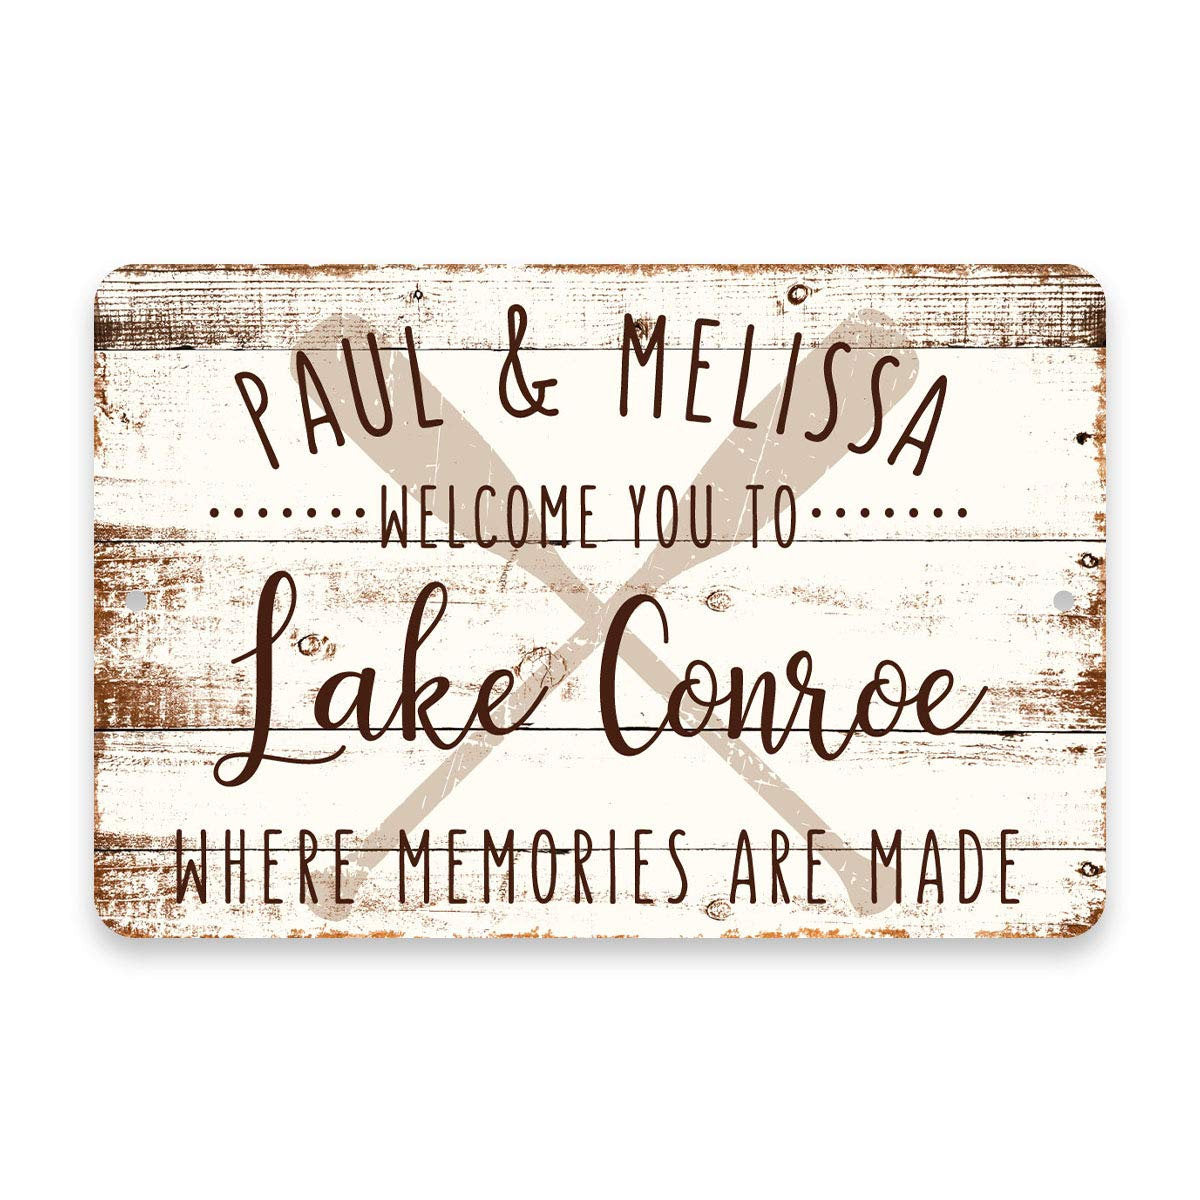 Personalized Welcome to Lake Conroe Where Memories are Made Sign - 8 X 12 Metal Sign with Wood Look